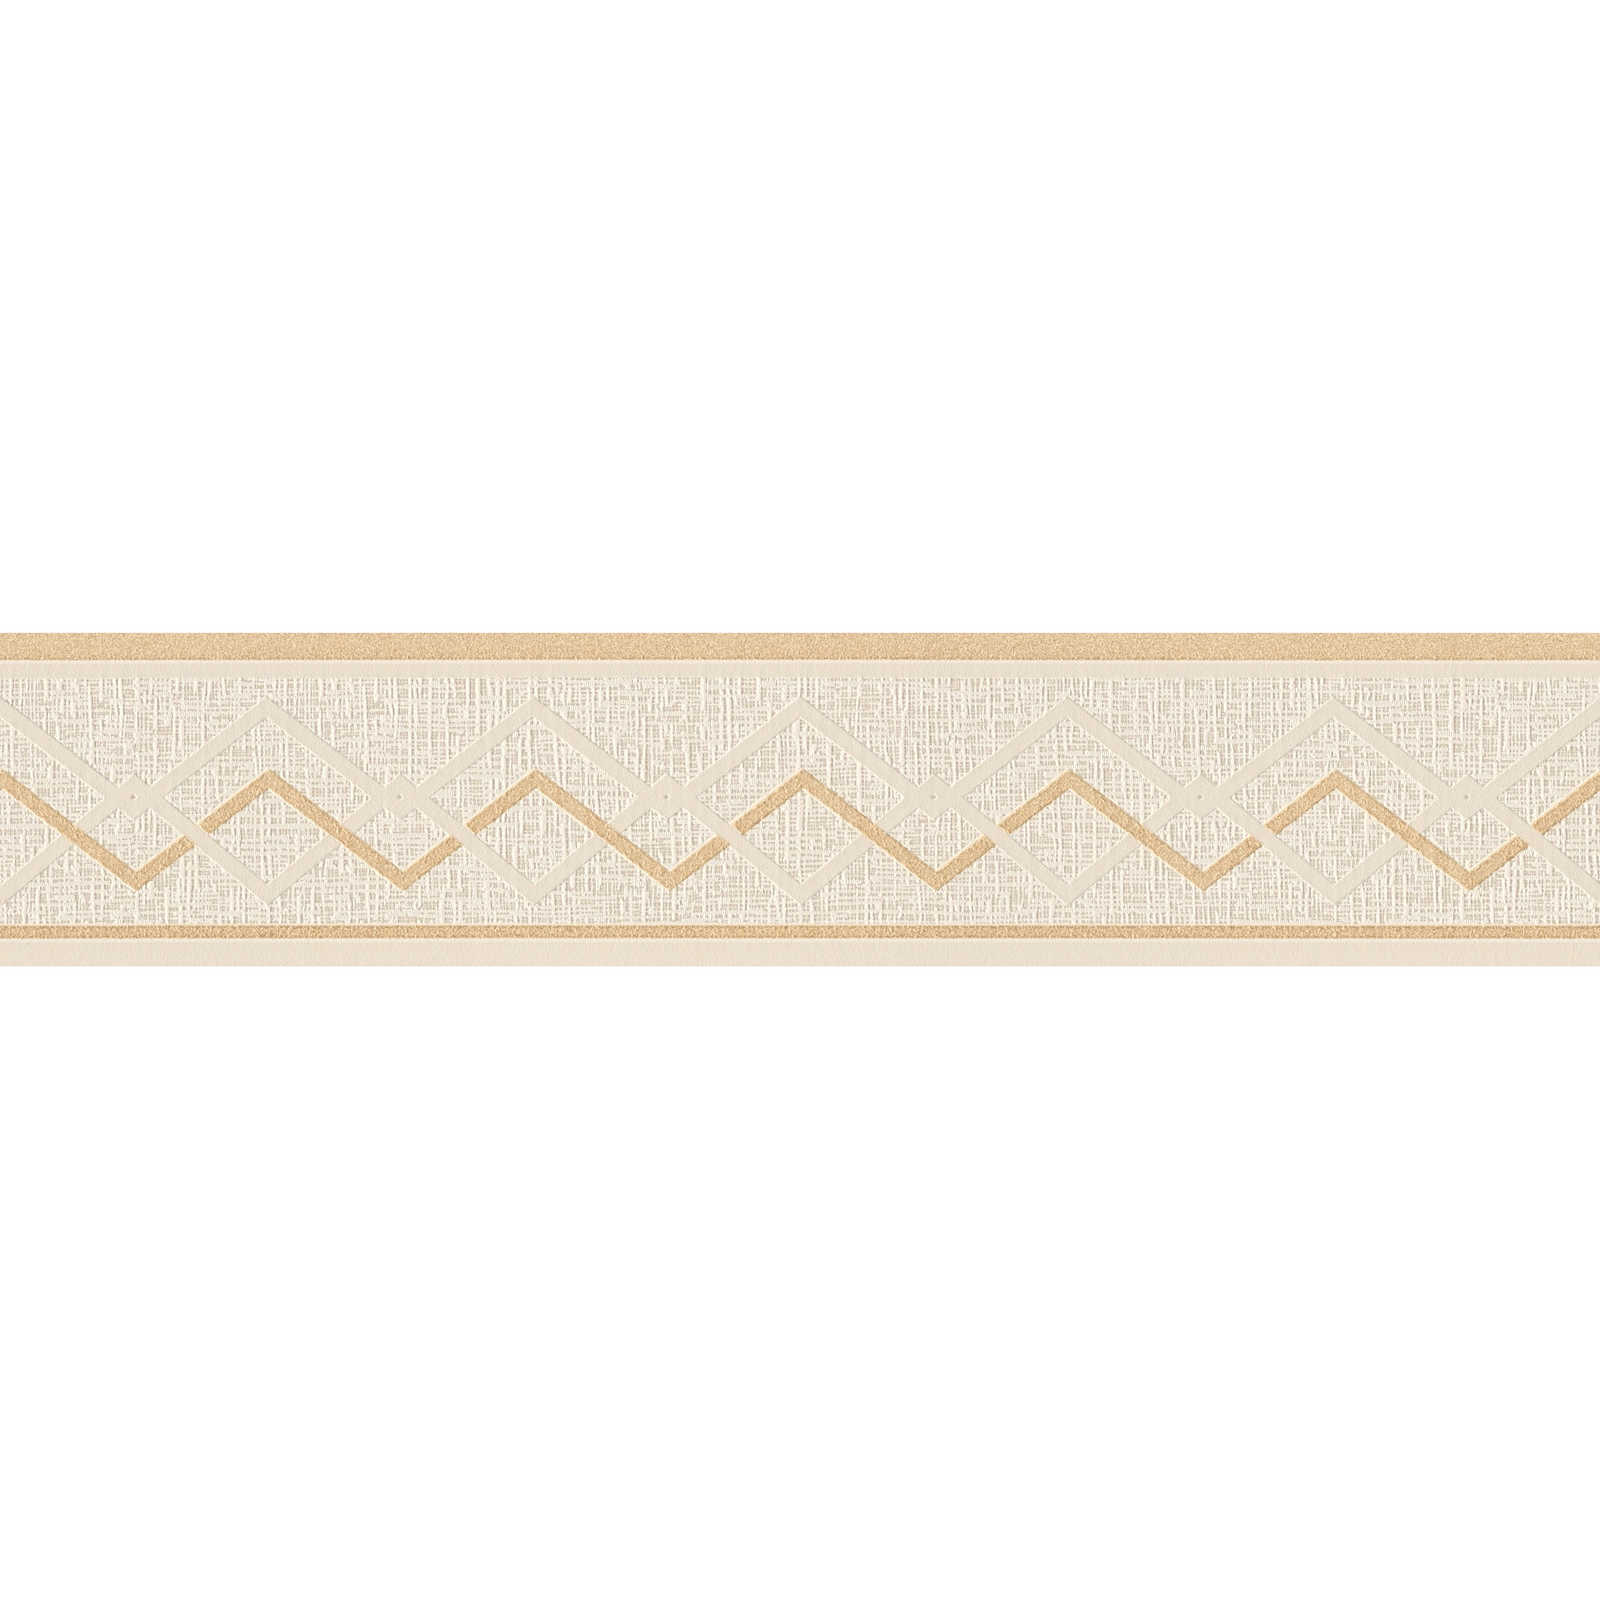         Border with zig zag design and gold glitter accent
    